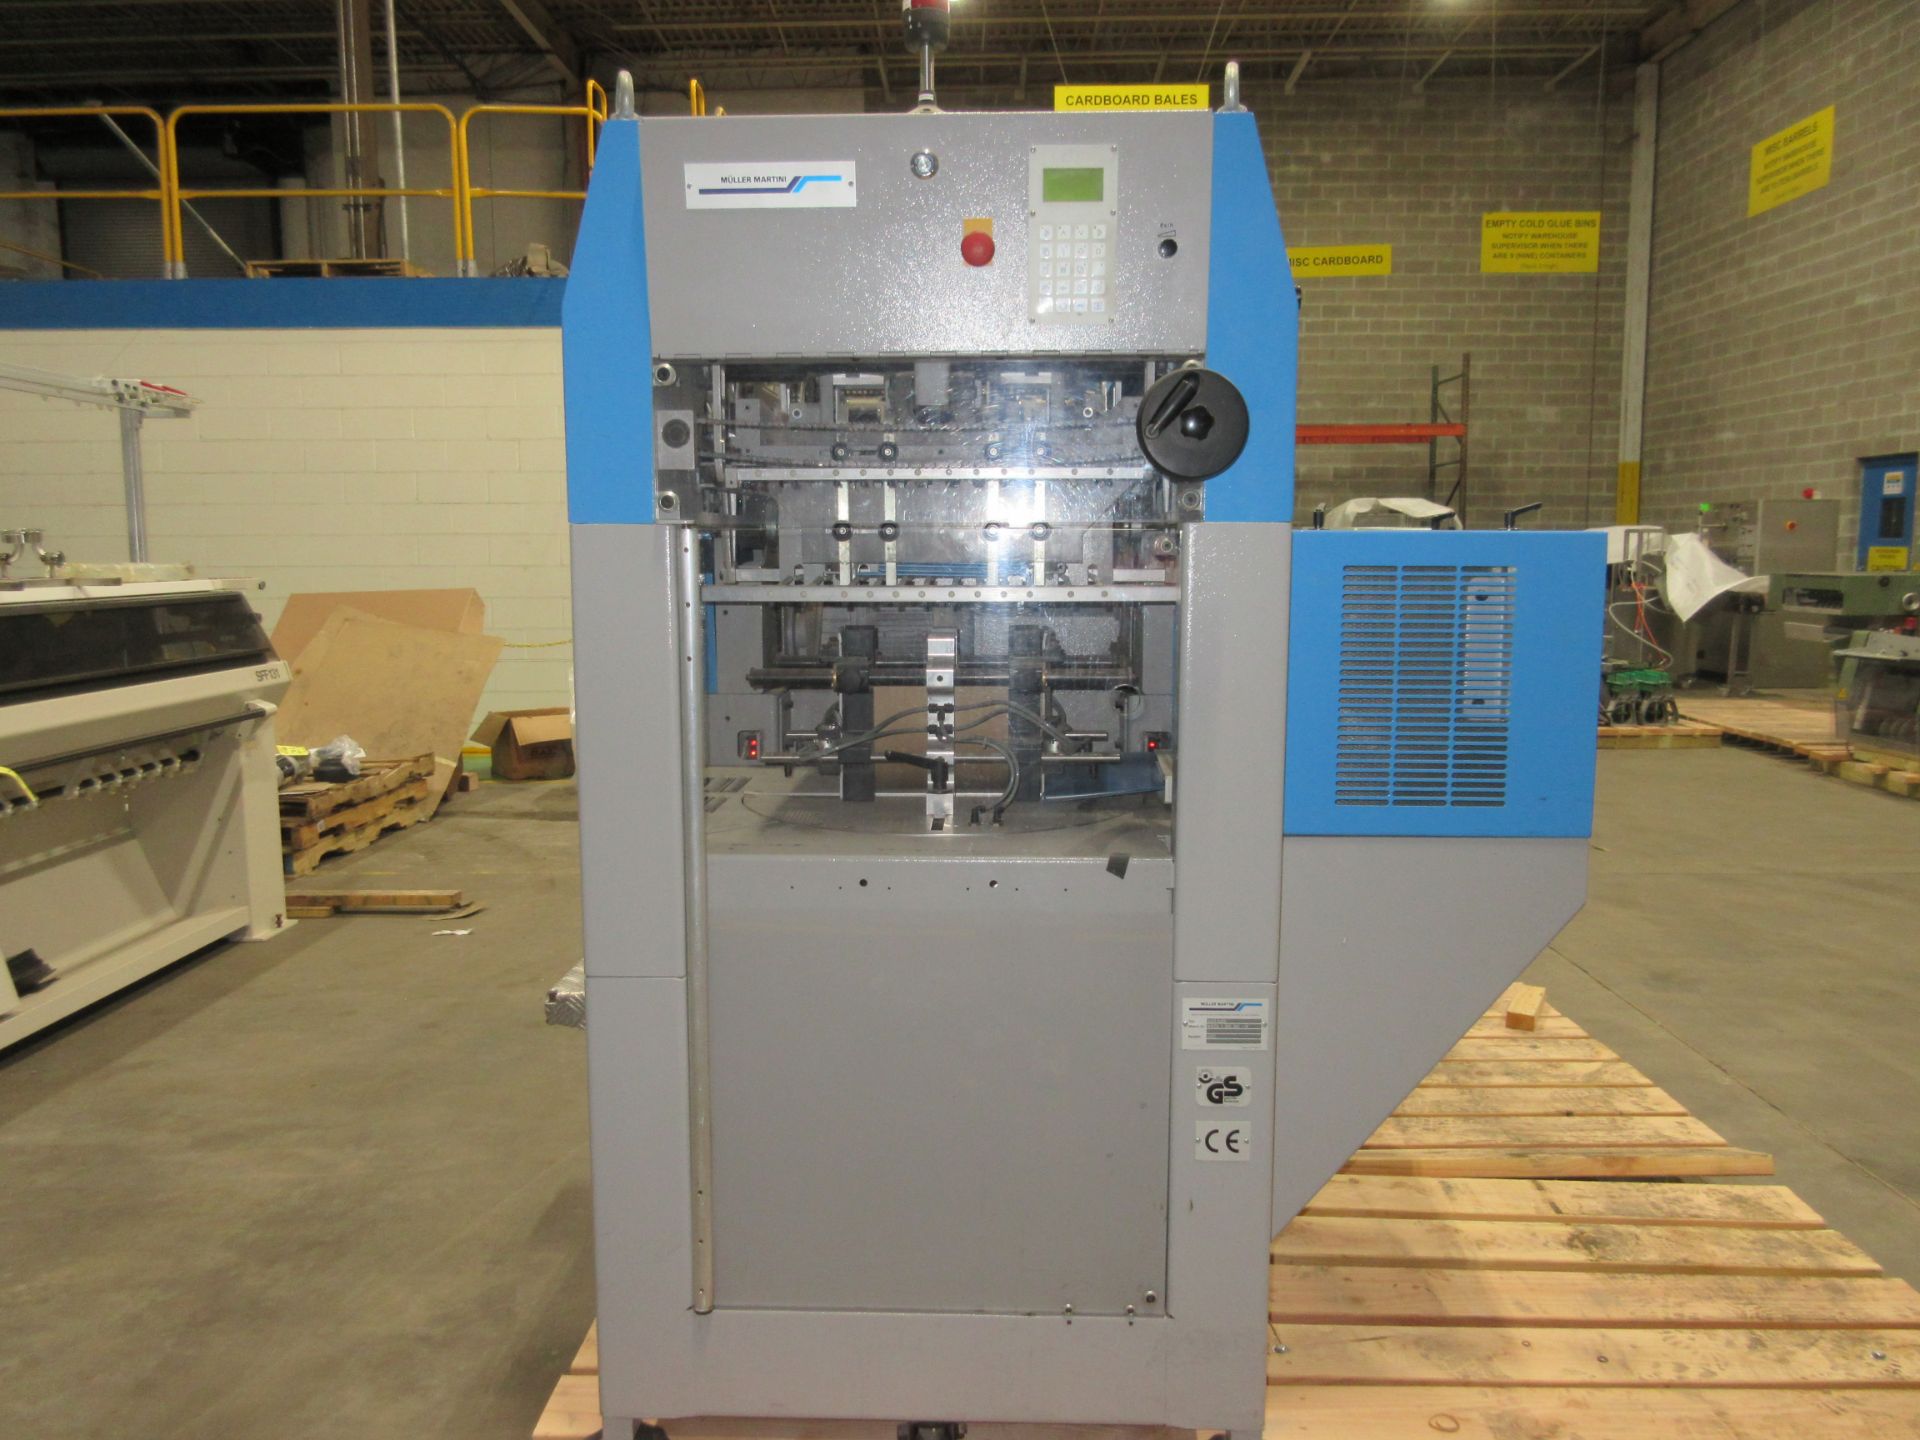 2007 Muller Perfetto md. 450.0400 counter stacker (LOCATED IN MILFORD, MA) - Image 8 of 9